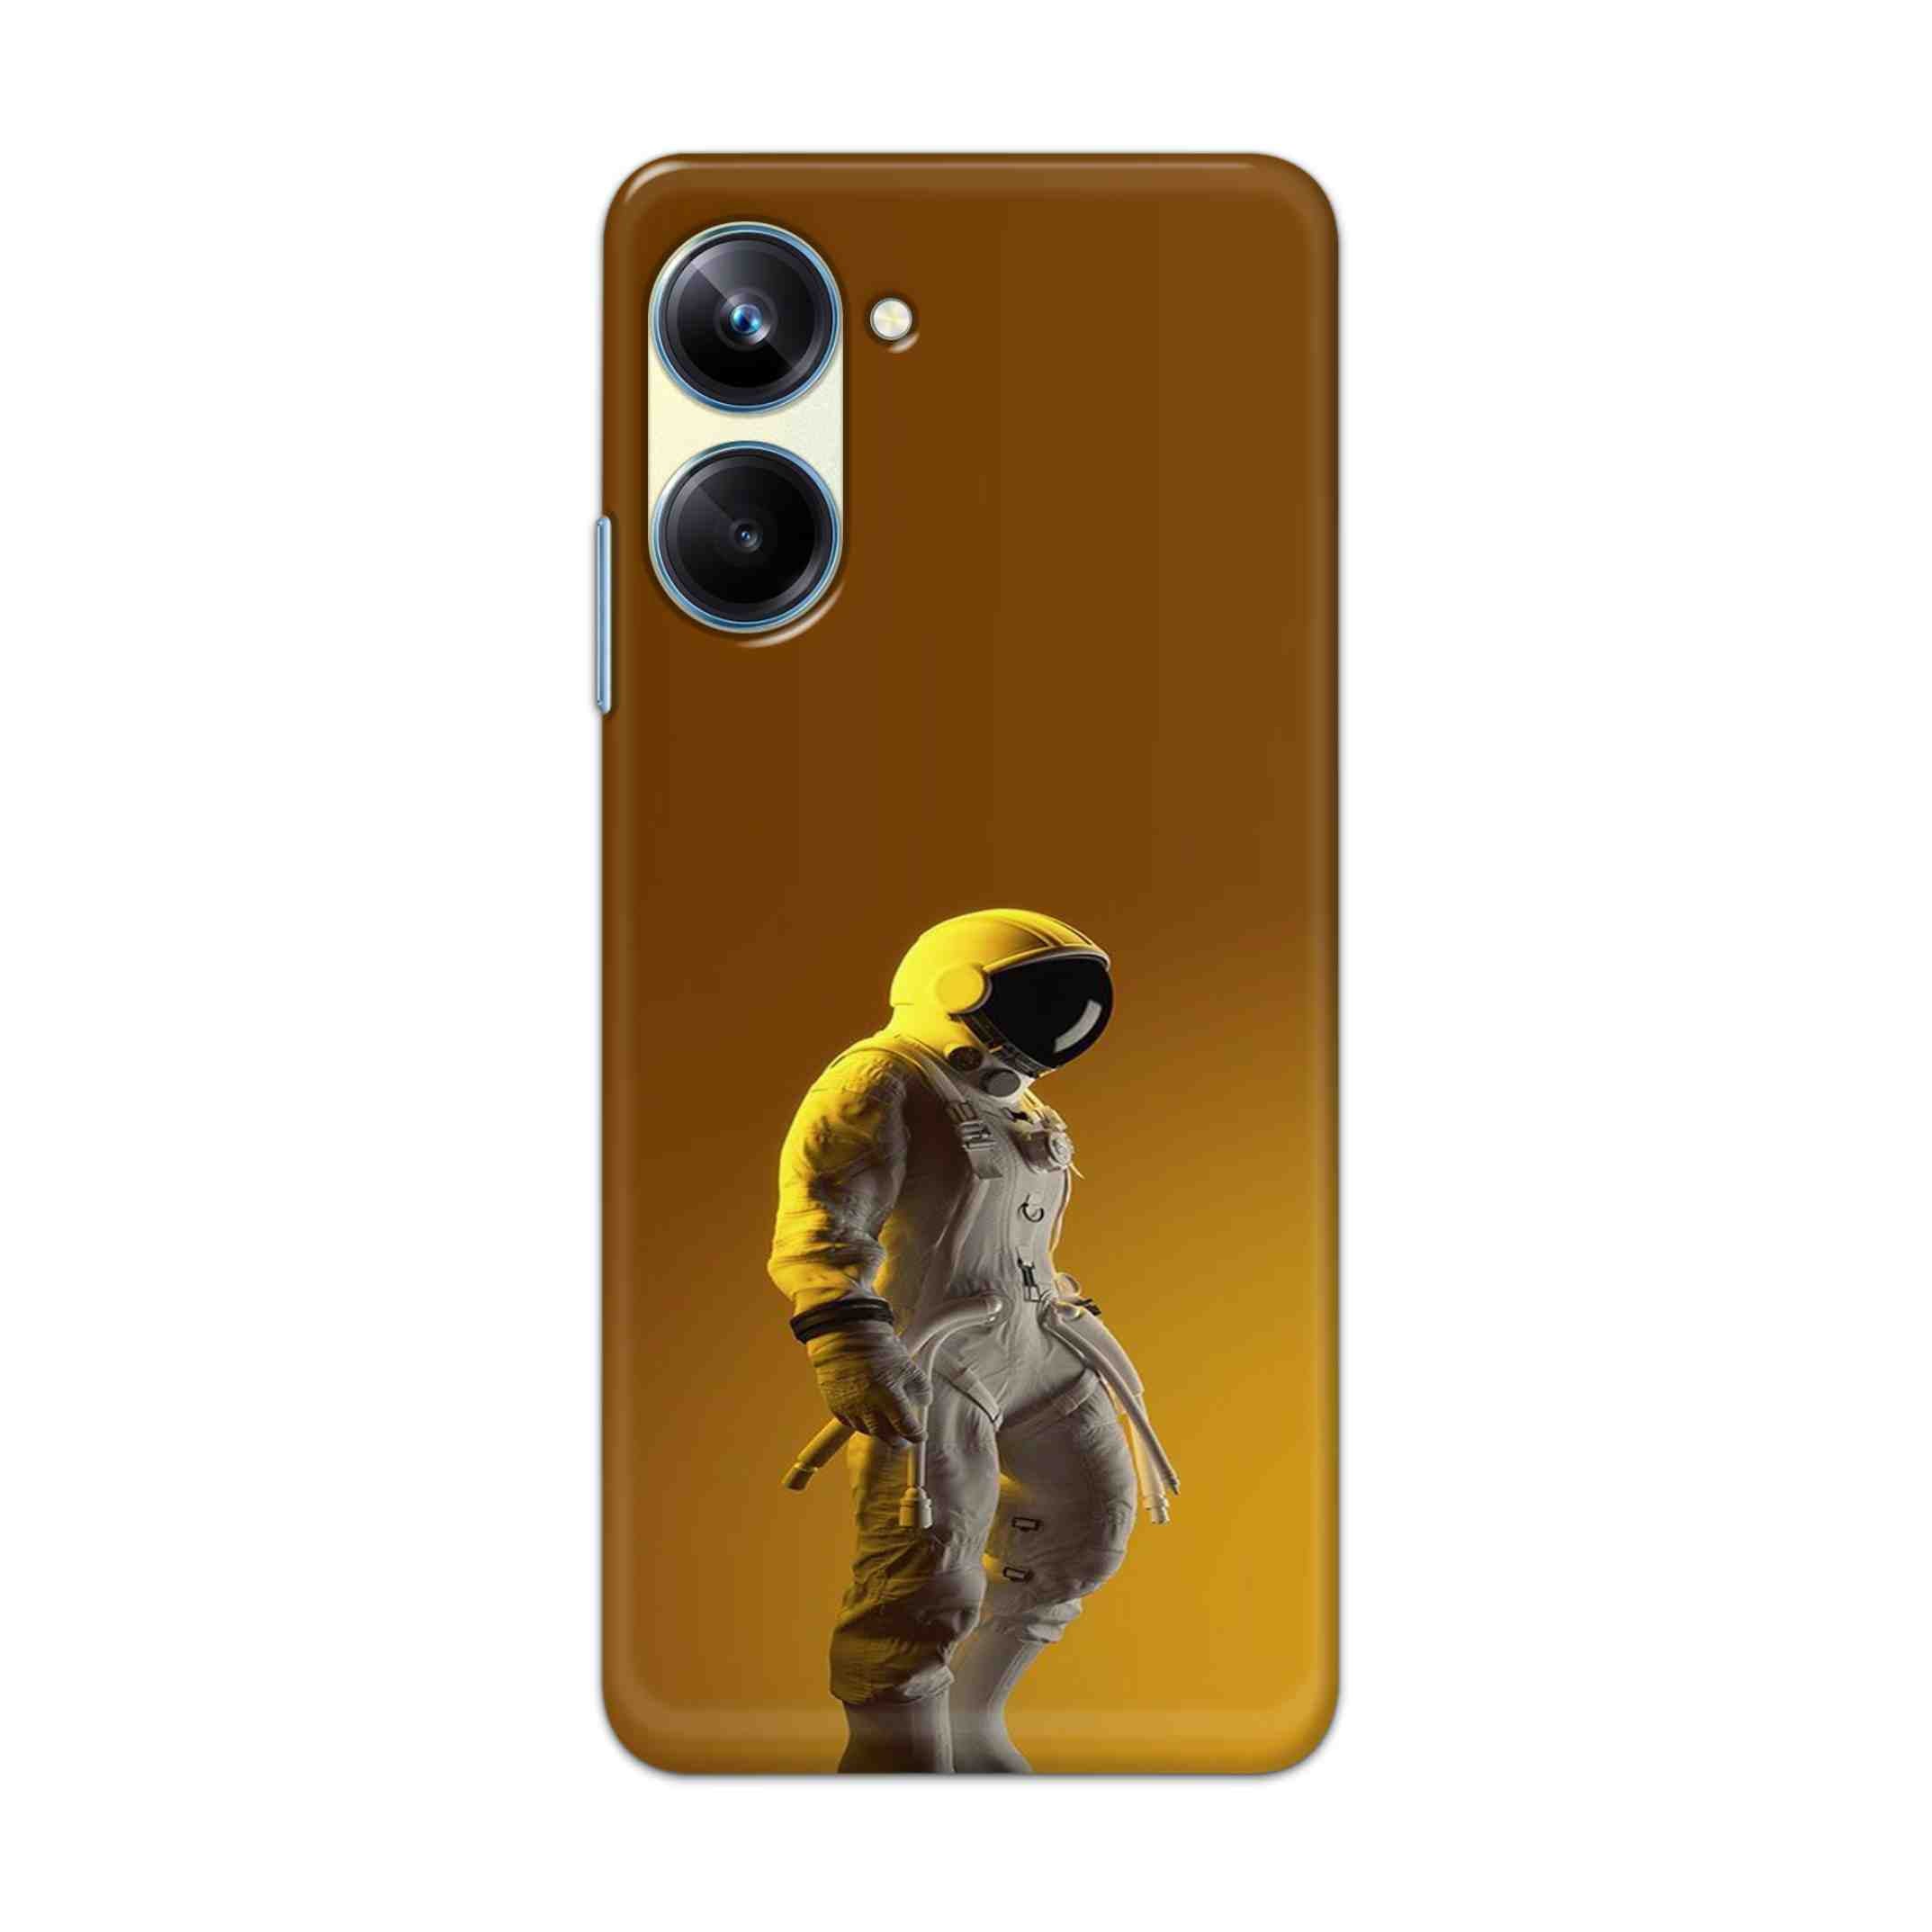 Buy Yellow Astronaut Hard Back Mobile Phone Case Cover For Realme 10 Pro Online